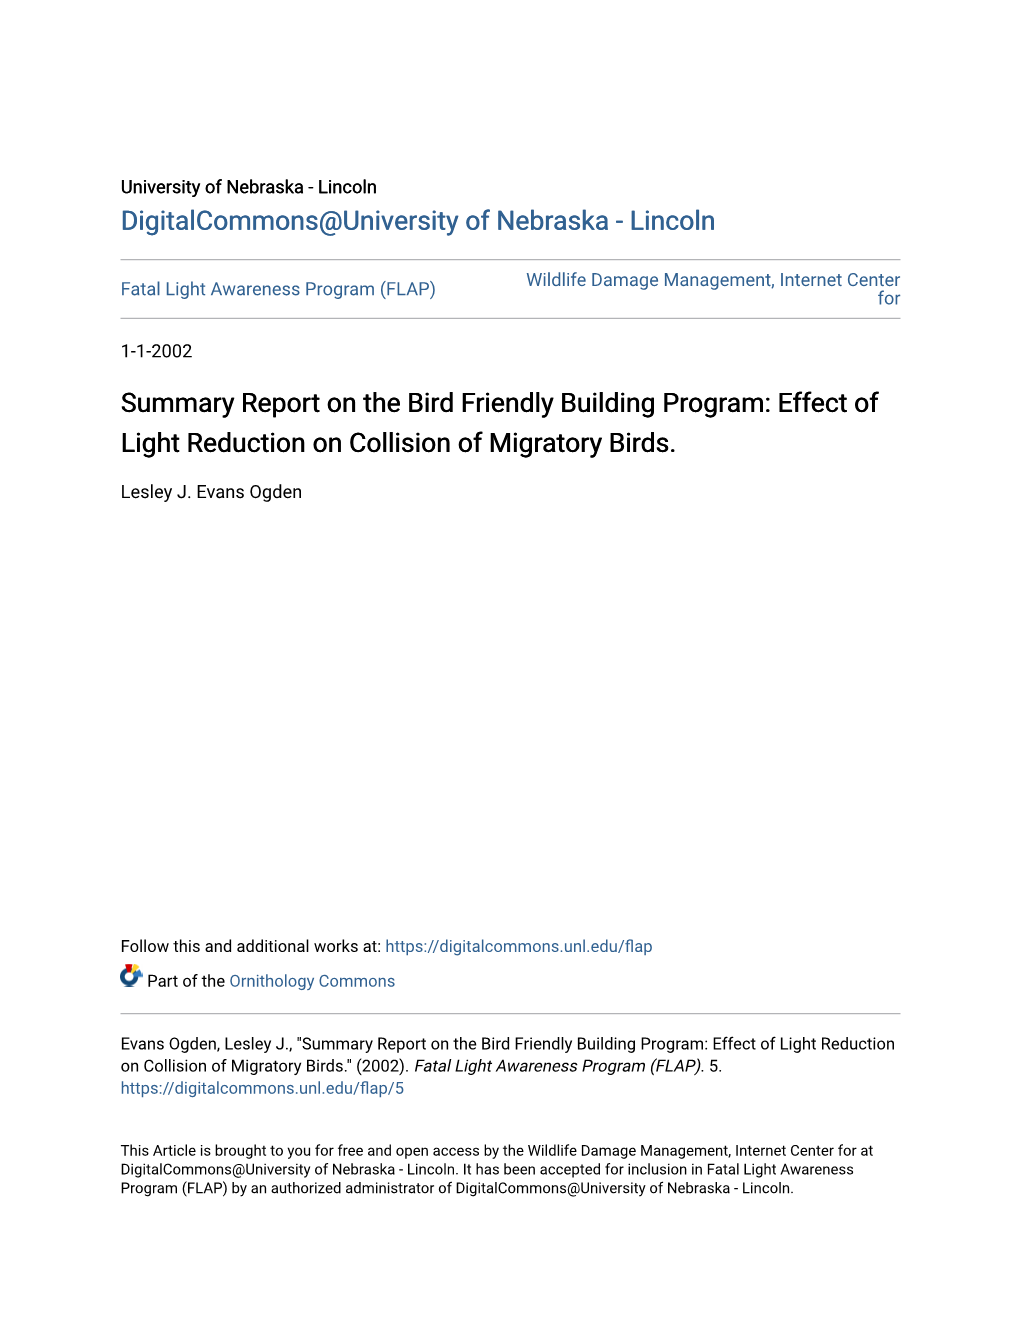 Summary Report on the Bird Friendly Building Program: Effect of Light Reduction on Collision of Migratory Birds